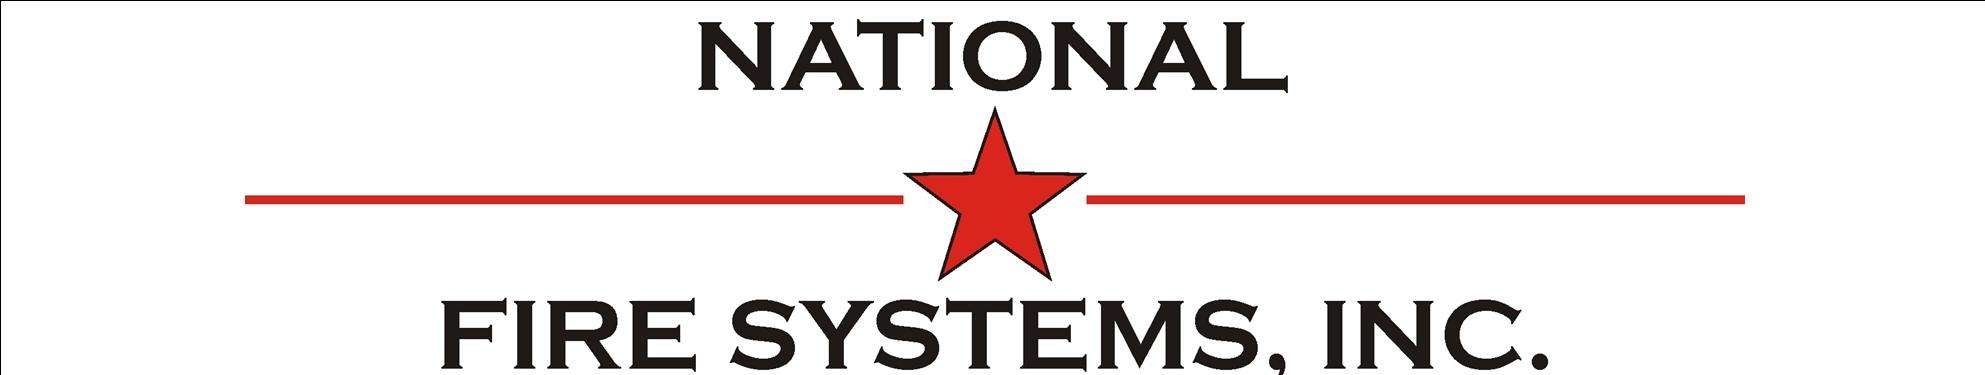 National Fire Systems, Inc. Logo